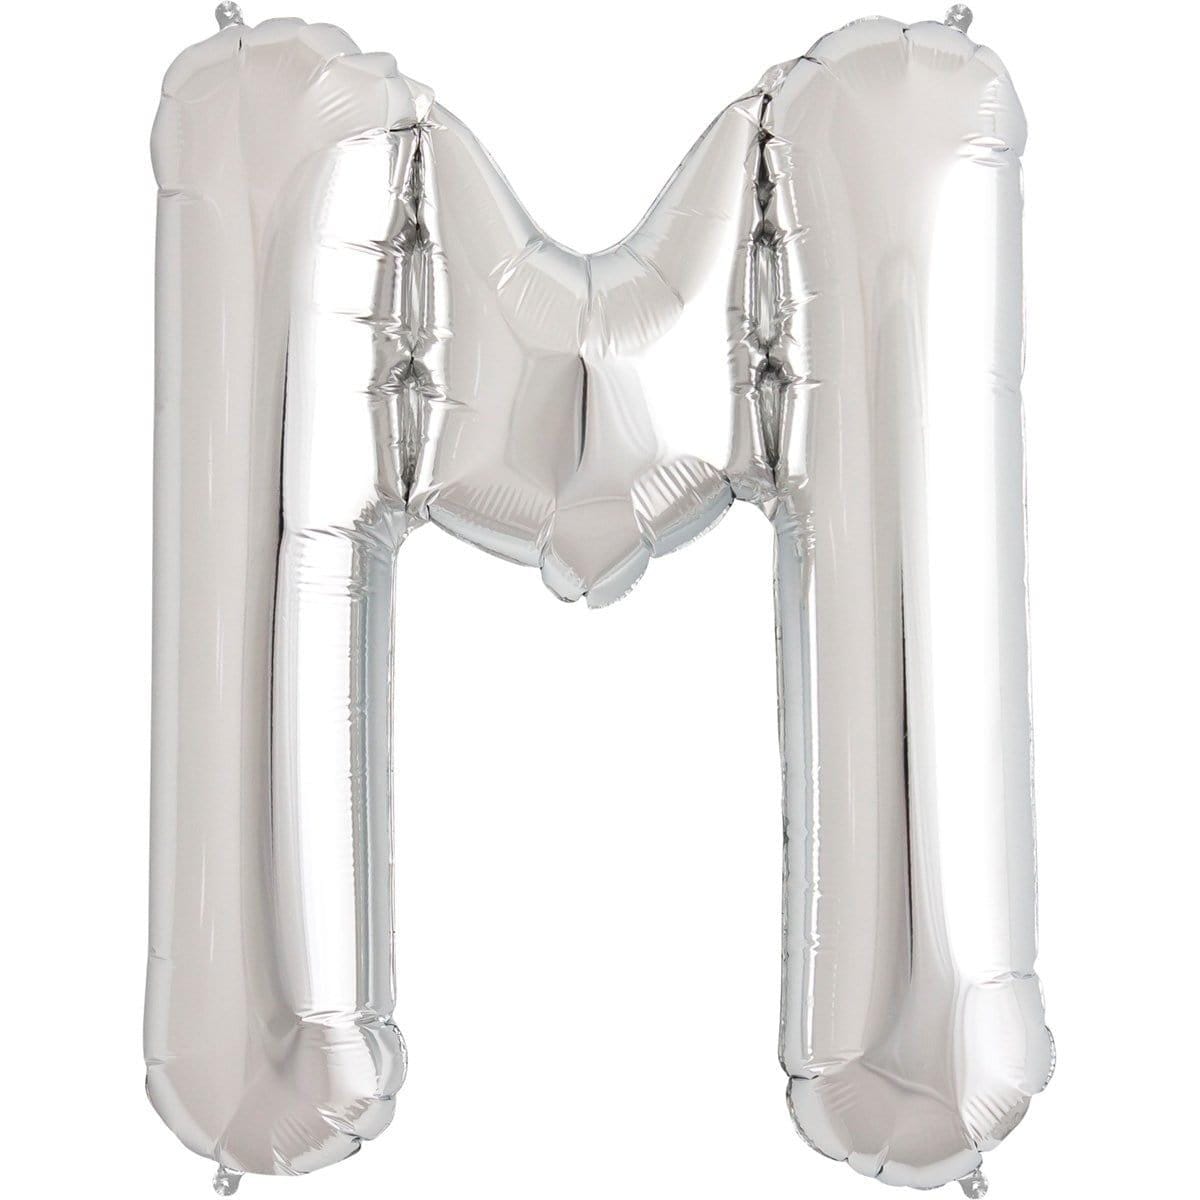 Buy Balloons Silver Letter M Foil Balloon, 34 Inches sold at Party Expert